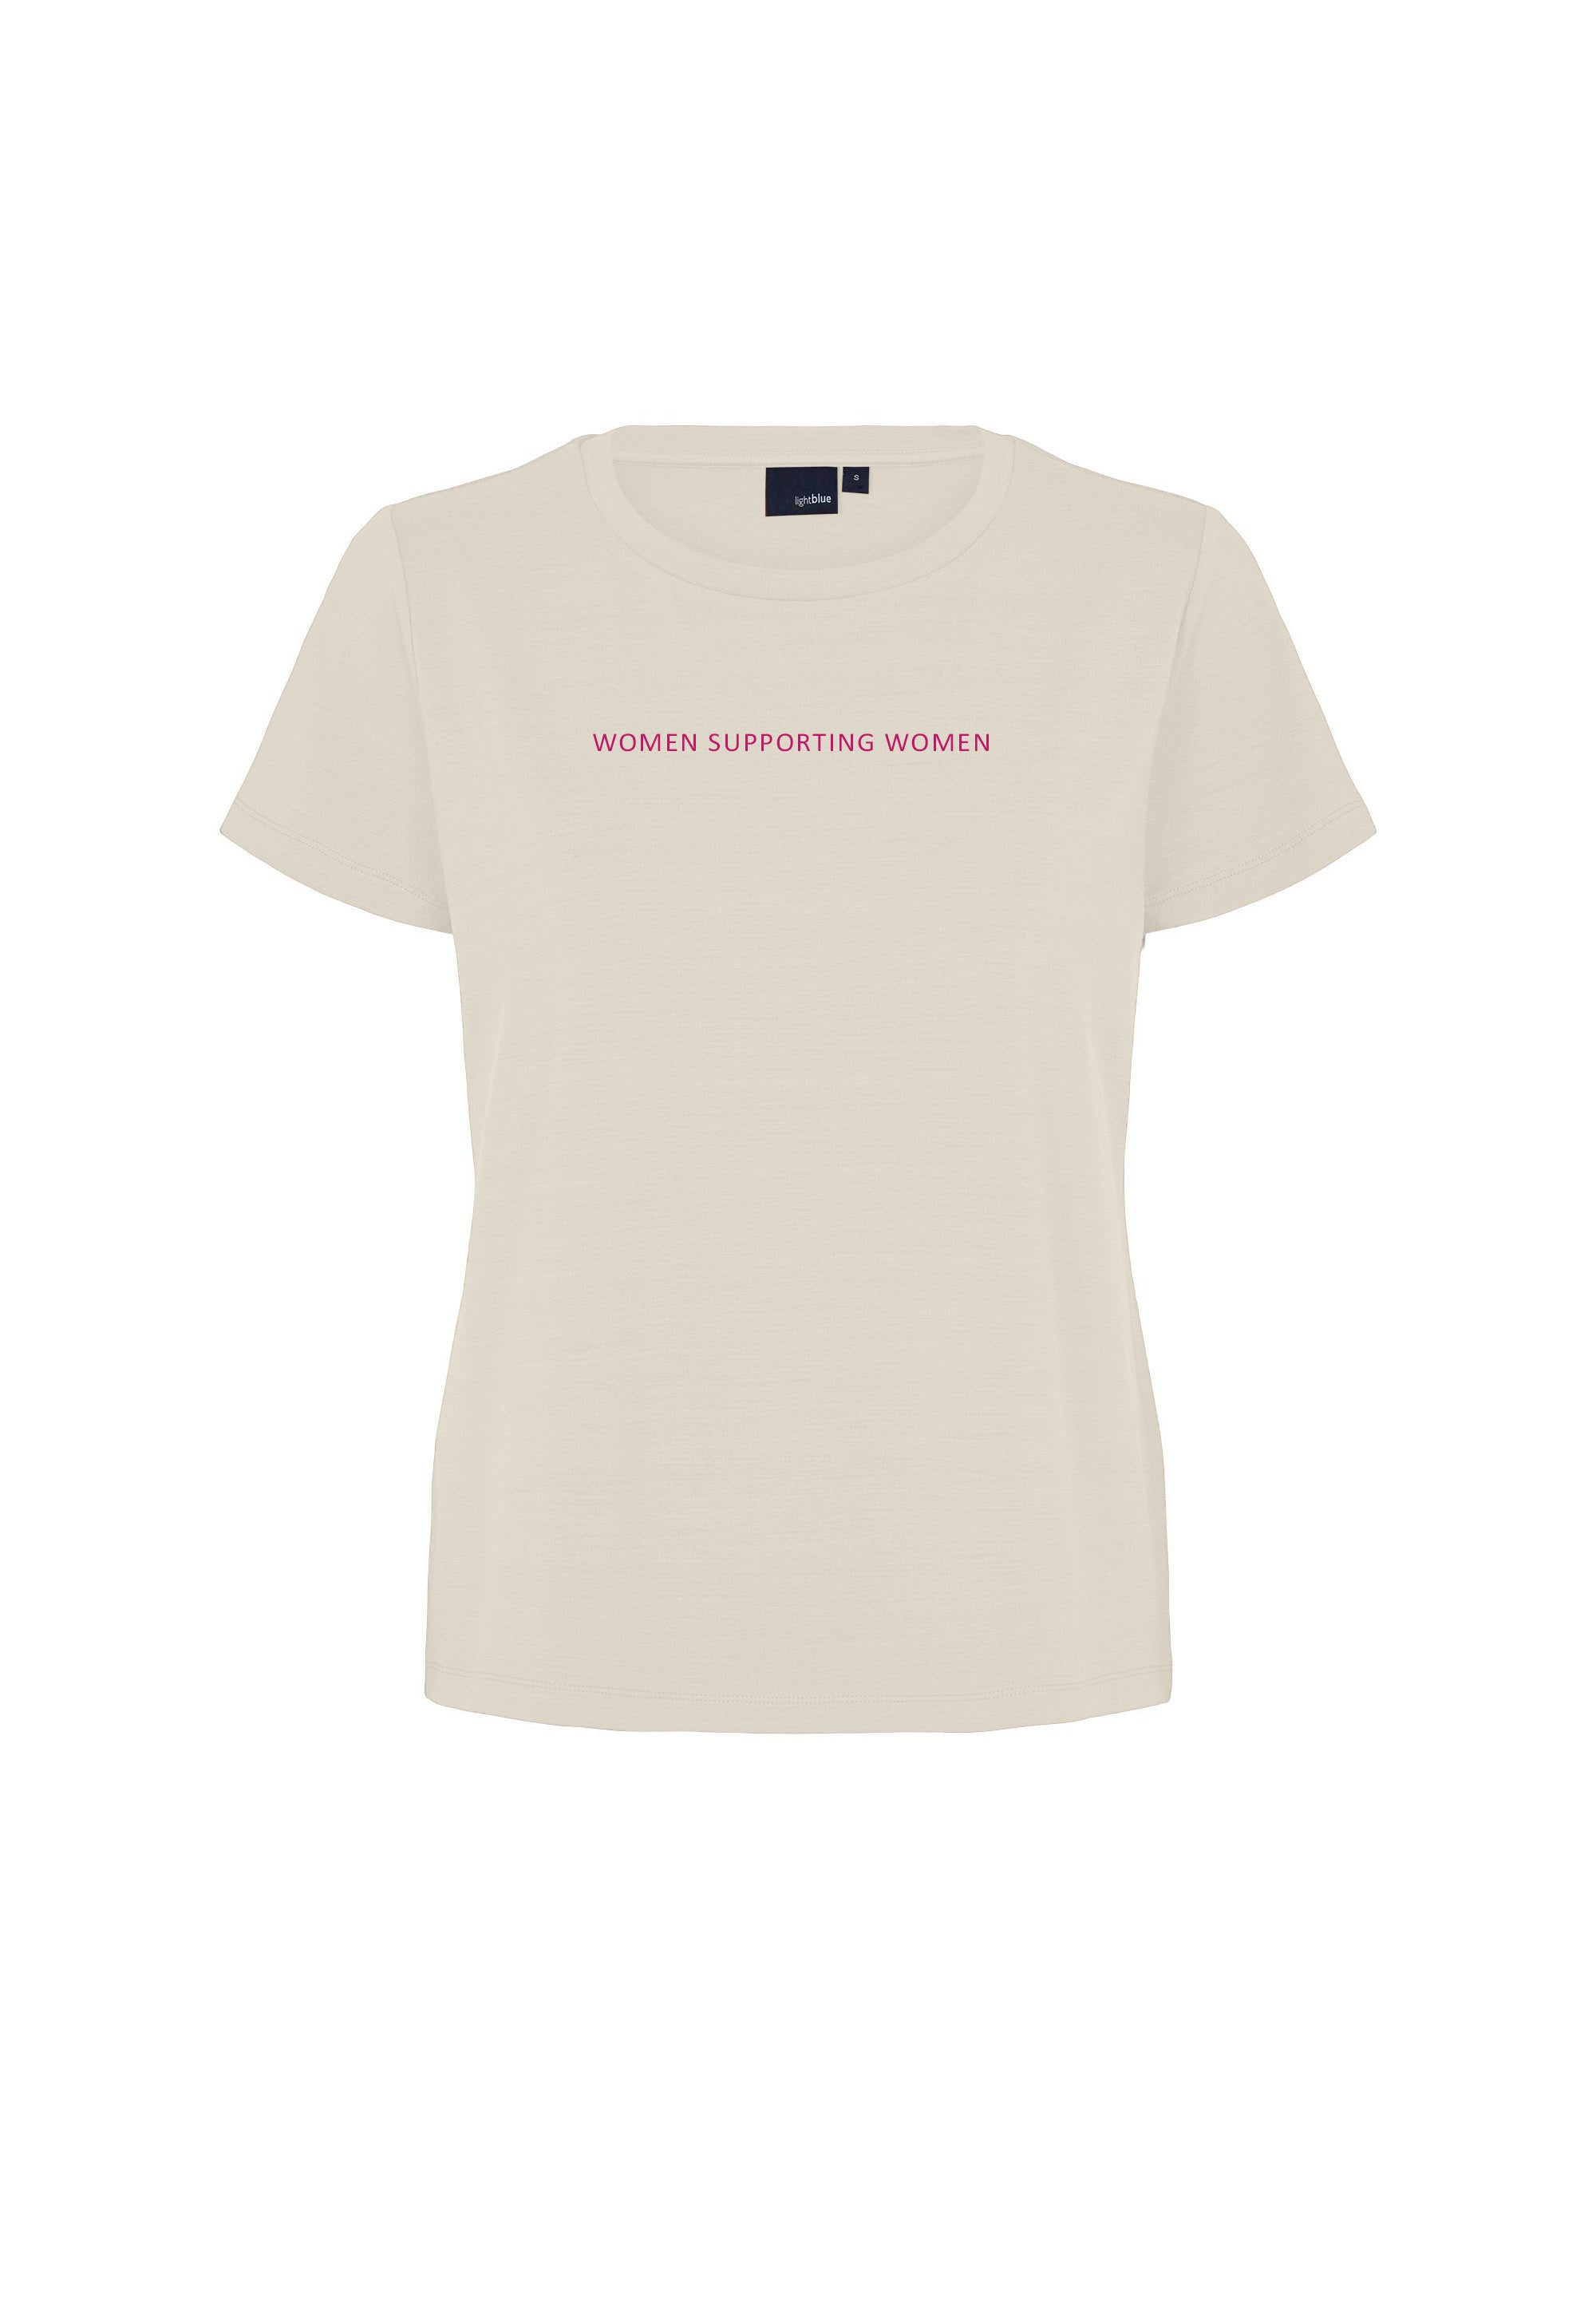 LAURIE Amanda - Women supporting Women Jersey T-Shirt T-Shirts 12031 - Ivory fabric with Hot Pink Print